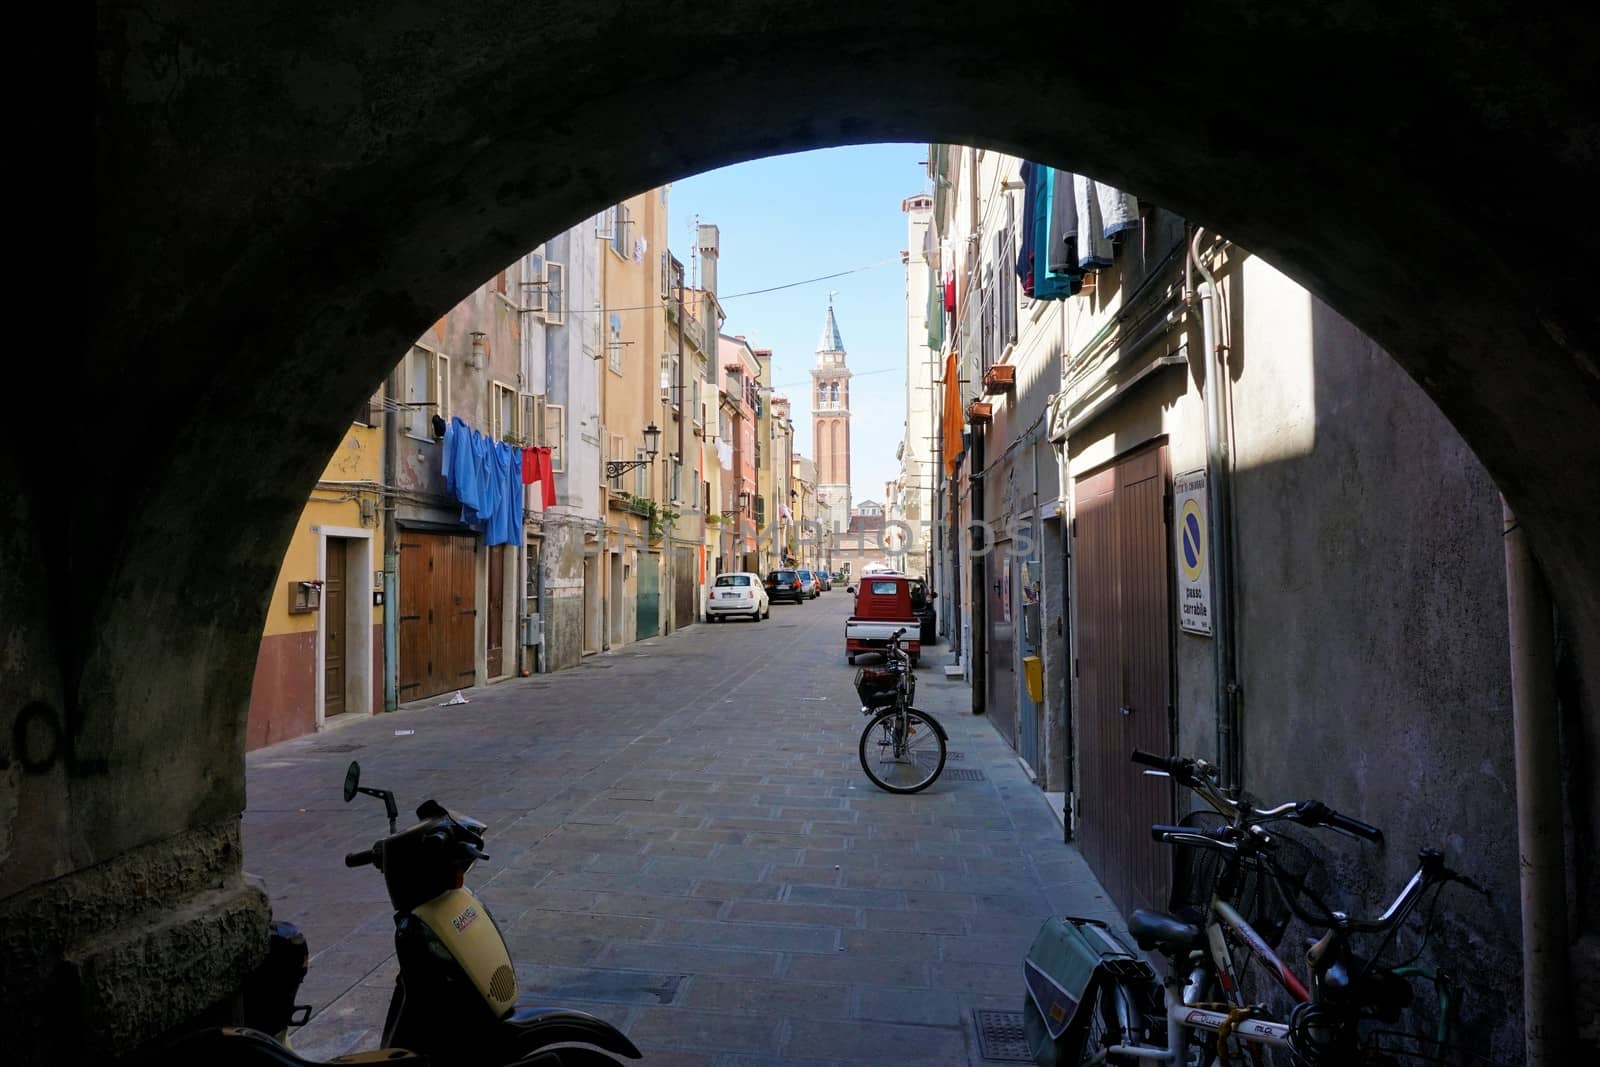 Typical street in the city center of Chioggia with bikes, scooters and cars by pisces2386